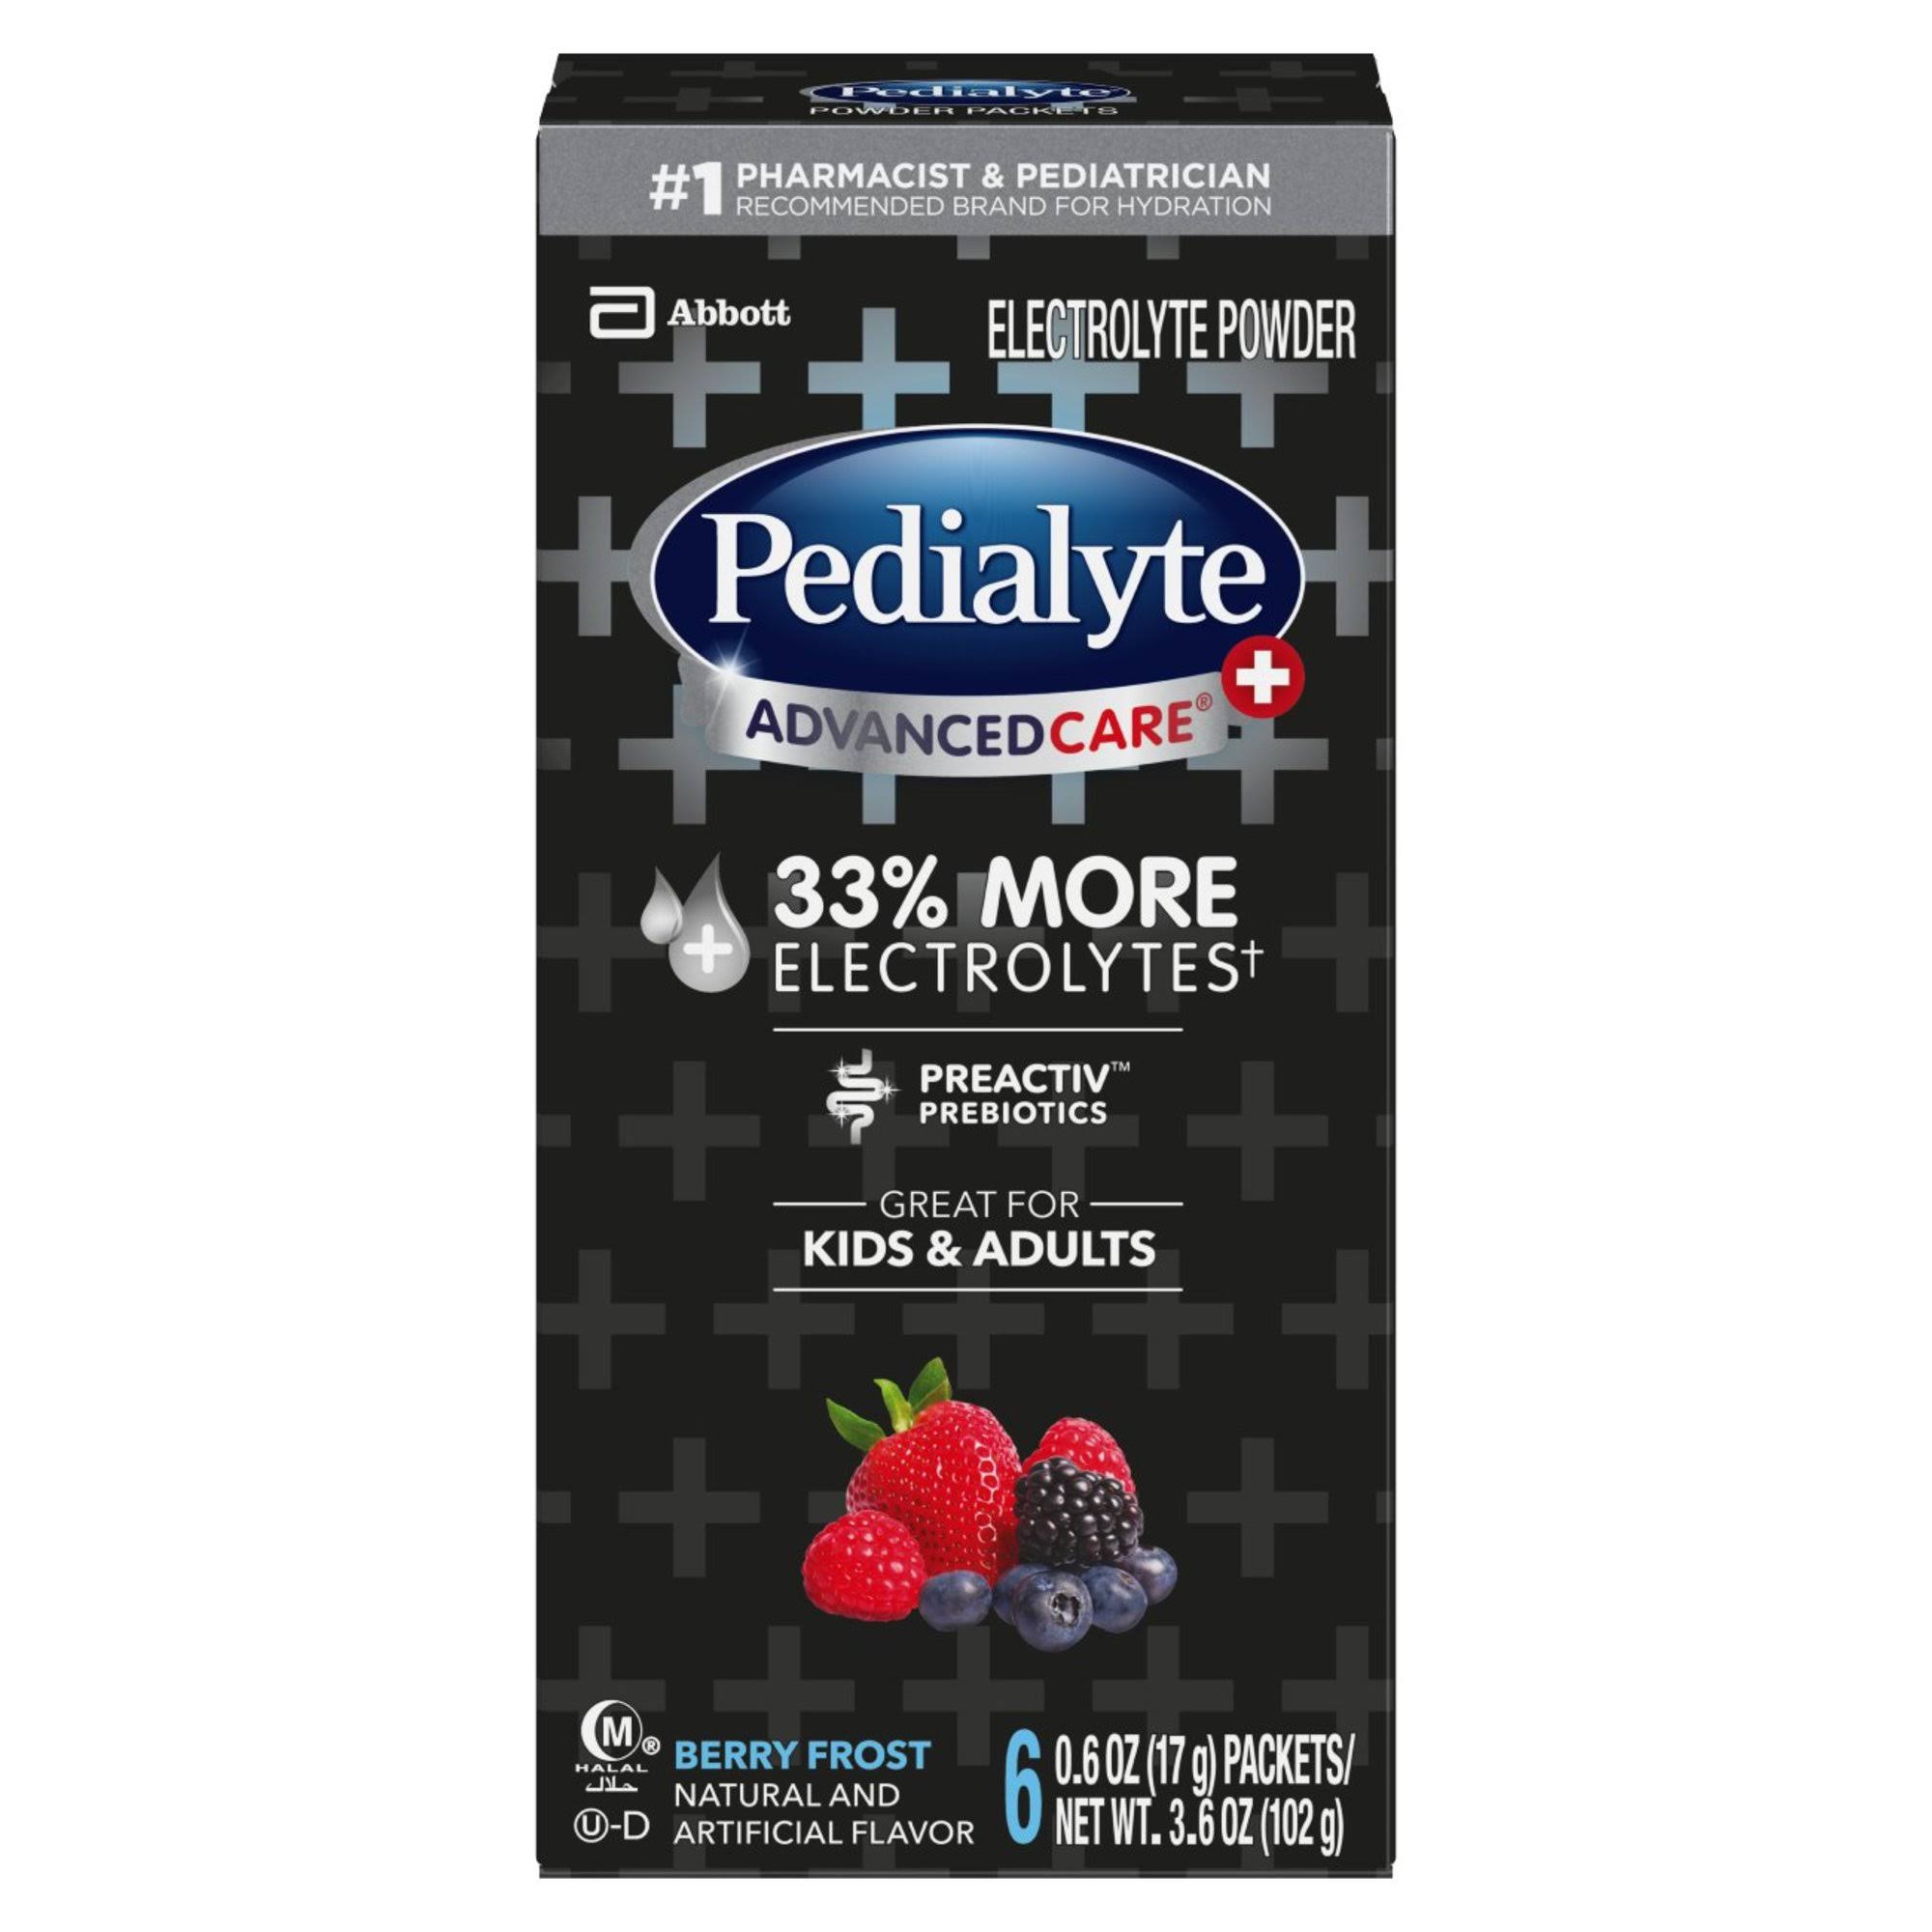 Pedialyte Advanced Care+ Electrolyte Powder, Berry Frost - 6 pack, 0.6 oz packets